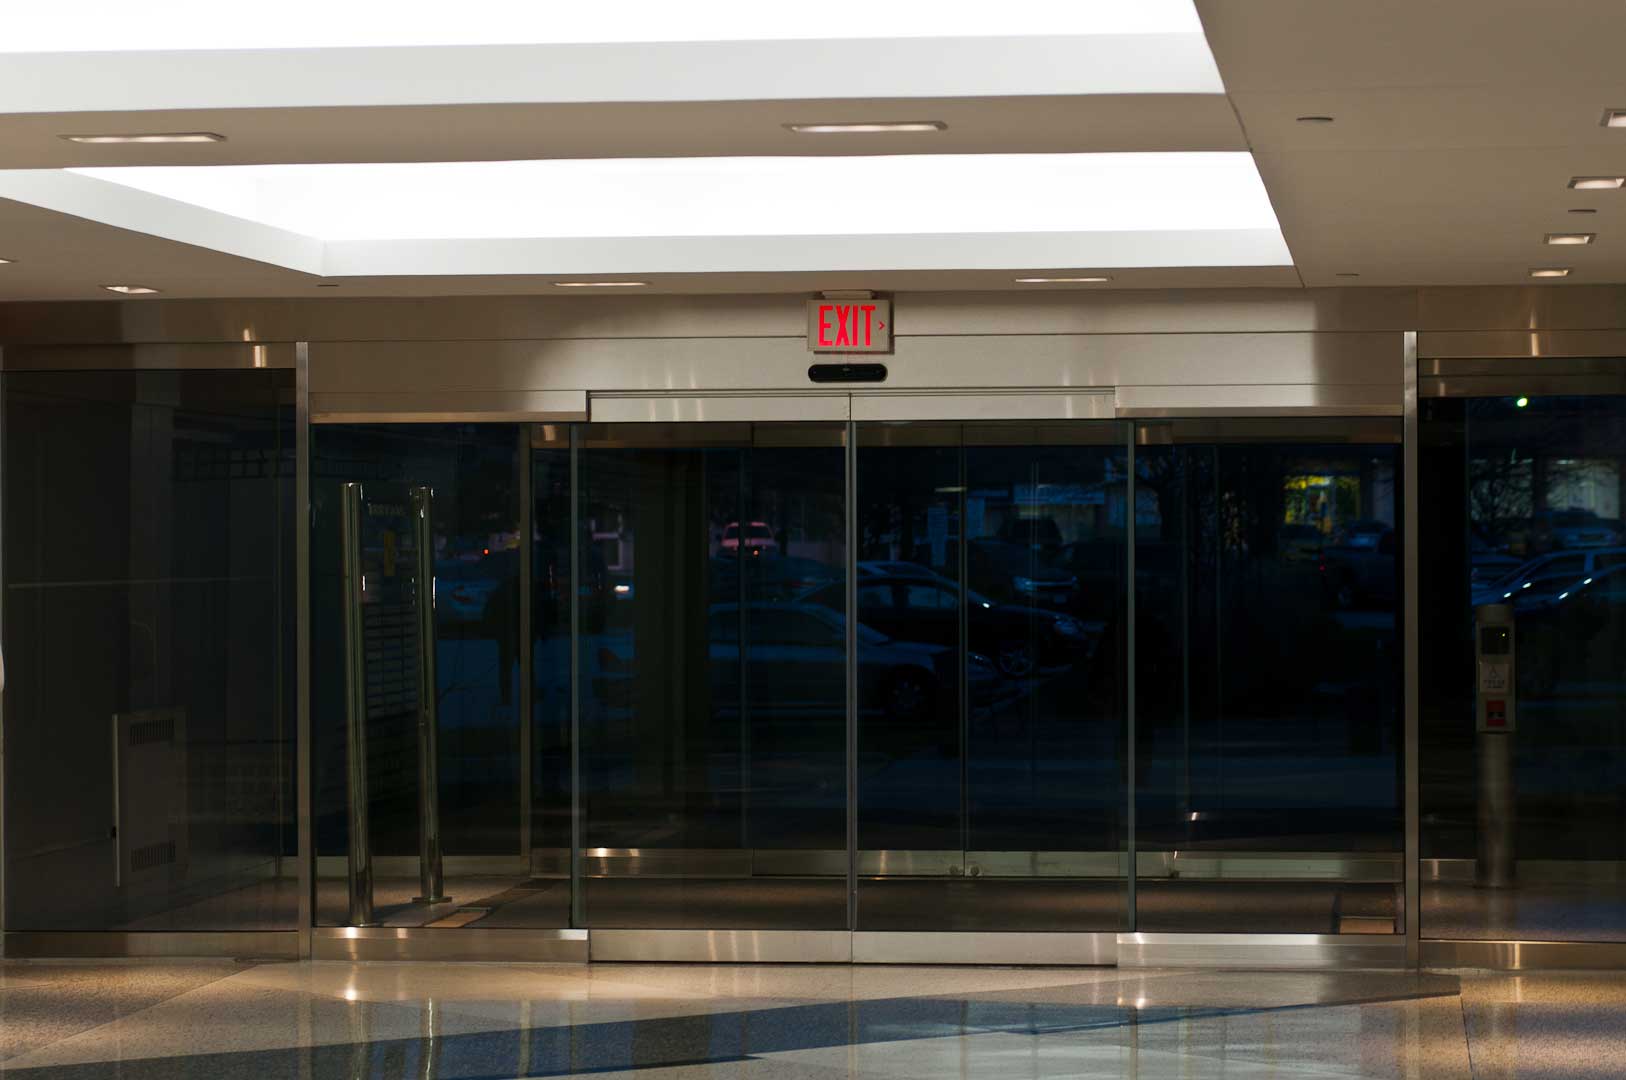 All glass building entrance installed by Explore1.ca in Toronto that features a Tormax Sliding door system